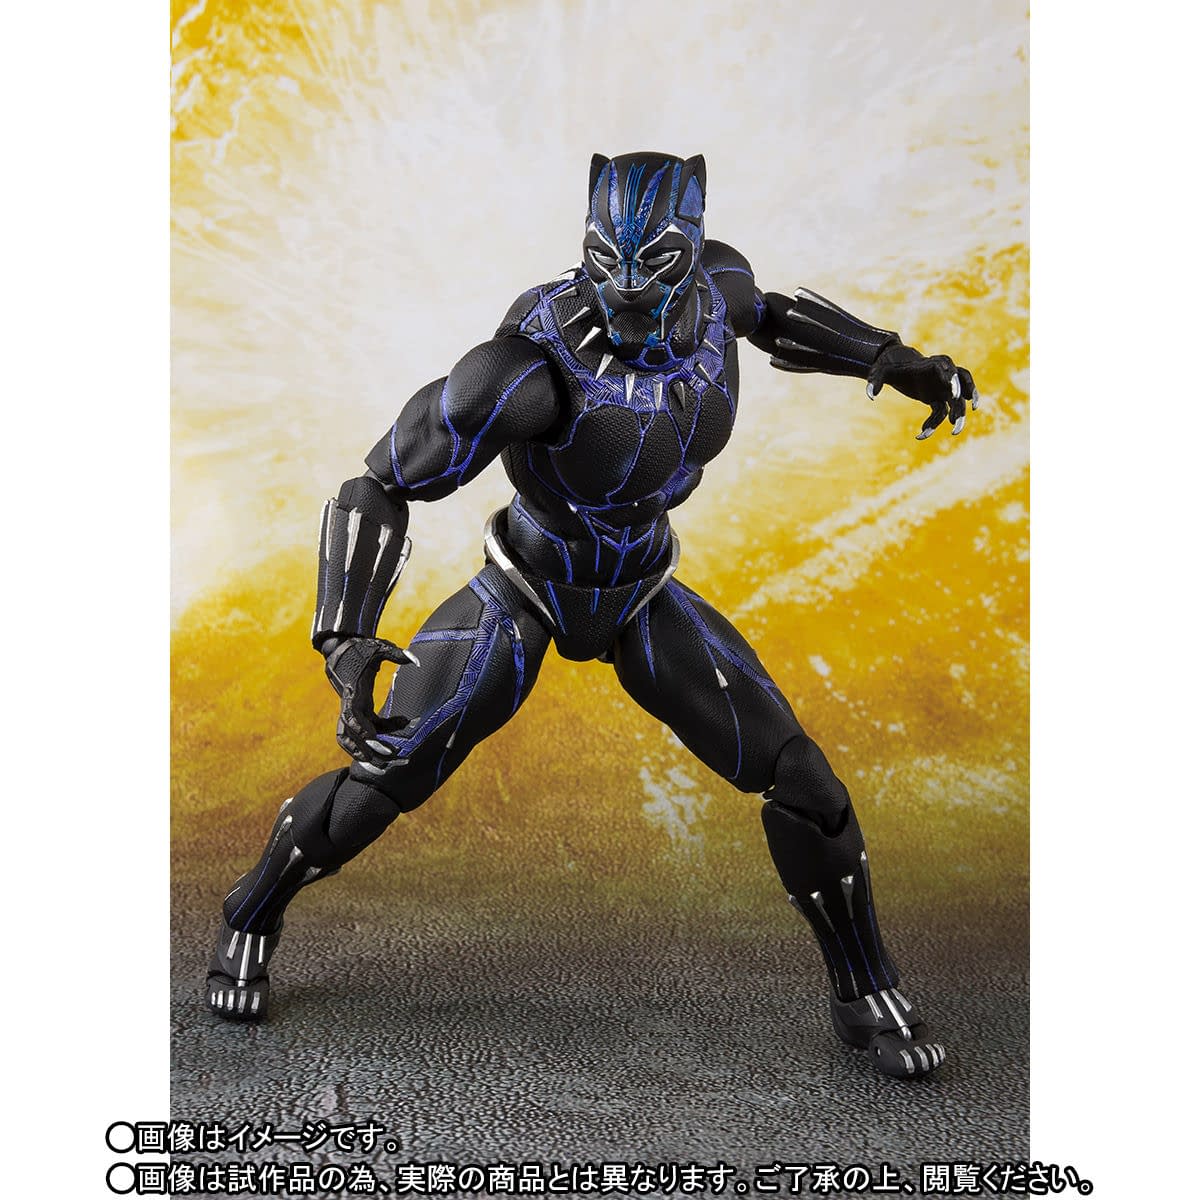 Black Panther Is King in Recently Announced S.H. Figuarts Figures